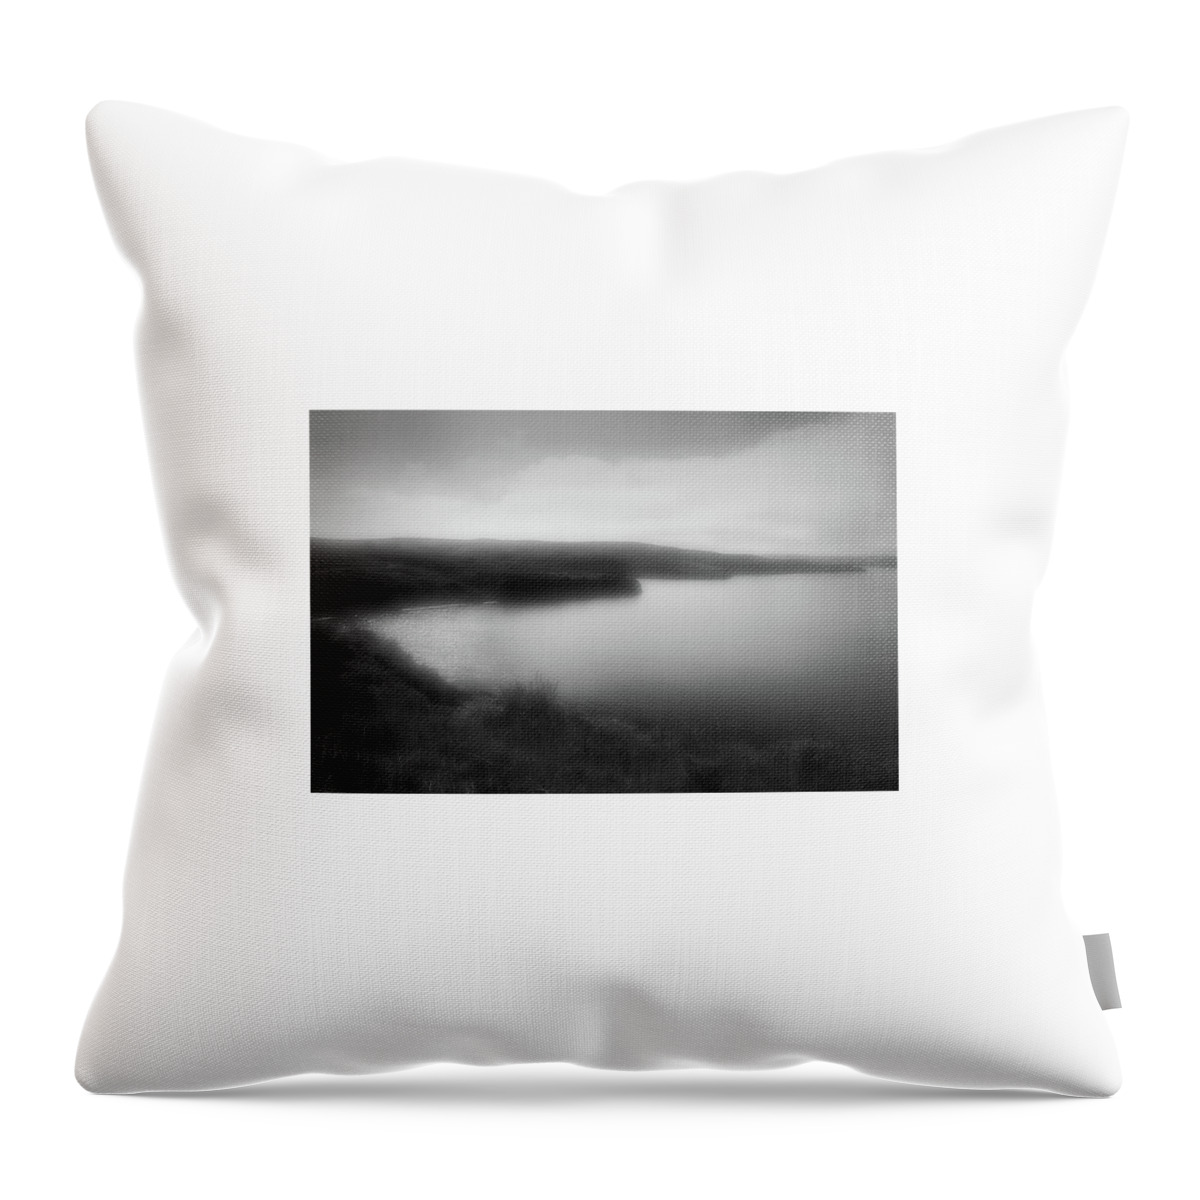 Tamál-húye Throw Pillow featuring the photograph Tamal-huye West by John Parulis